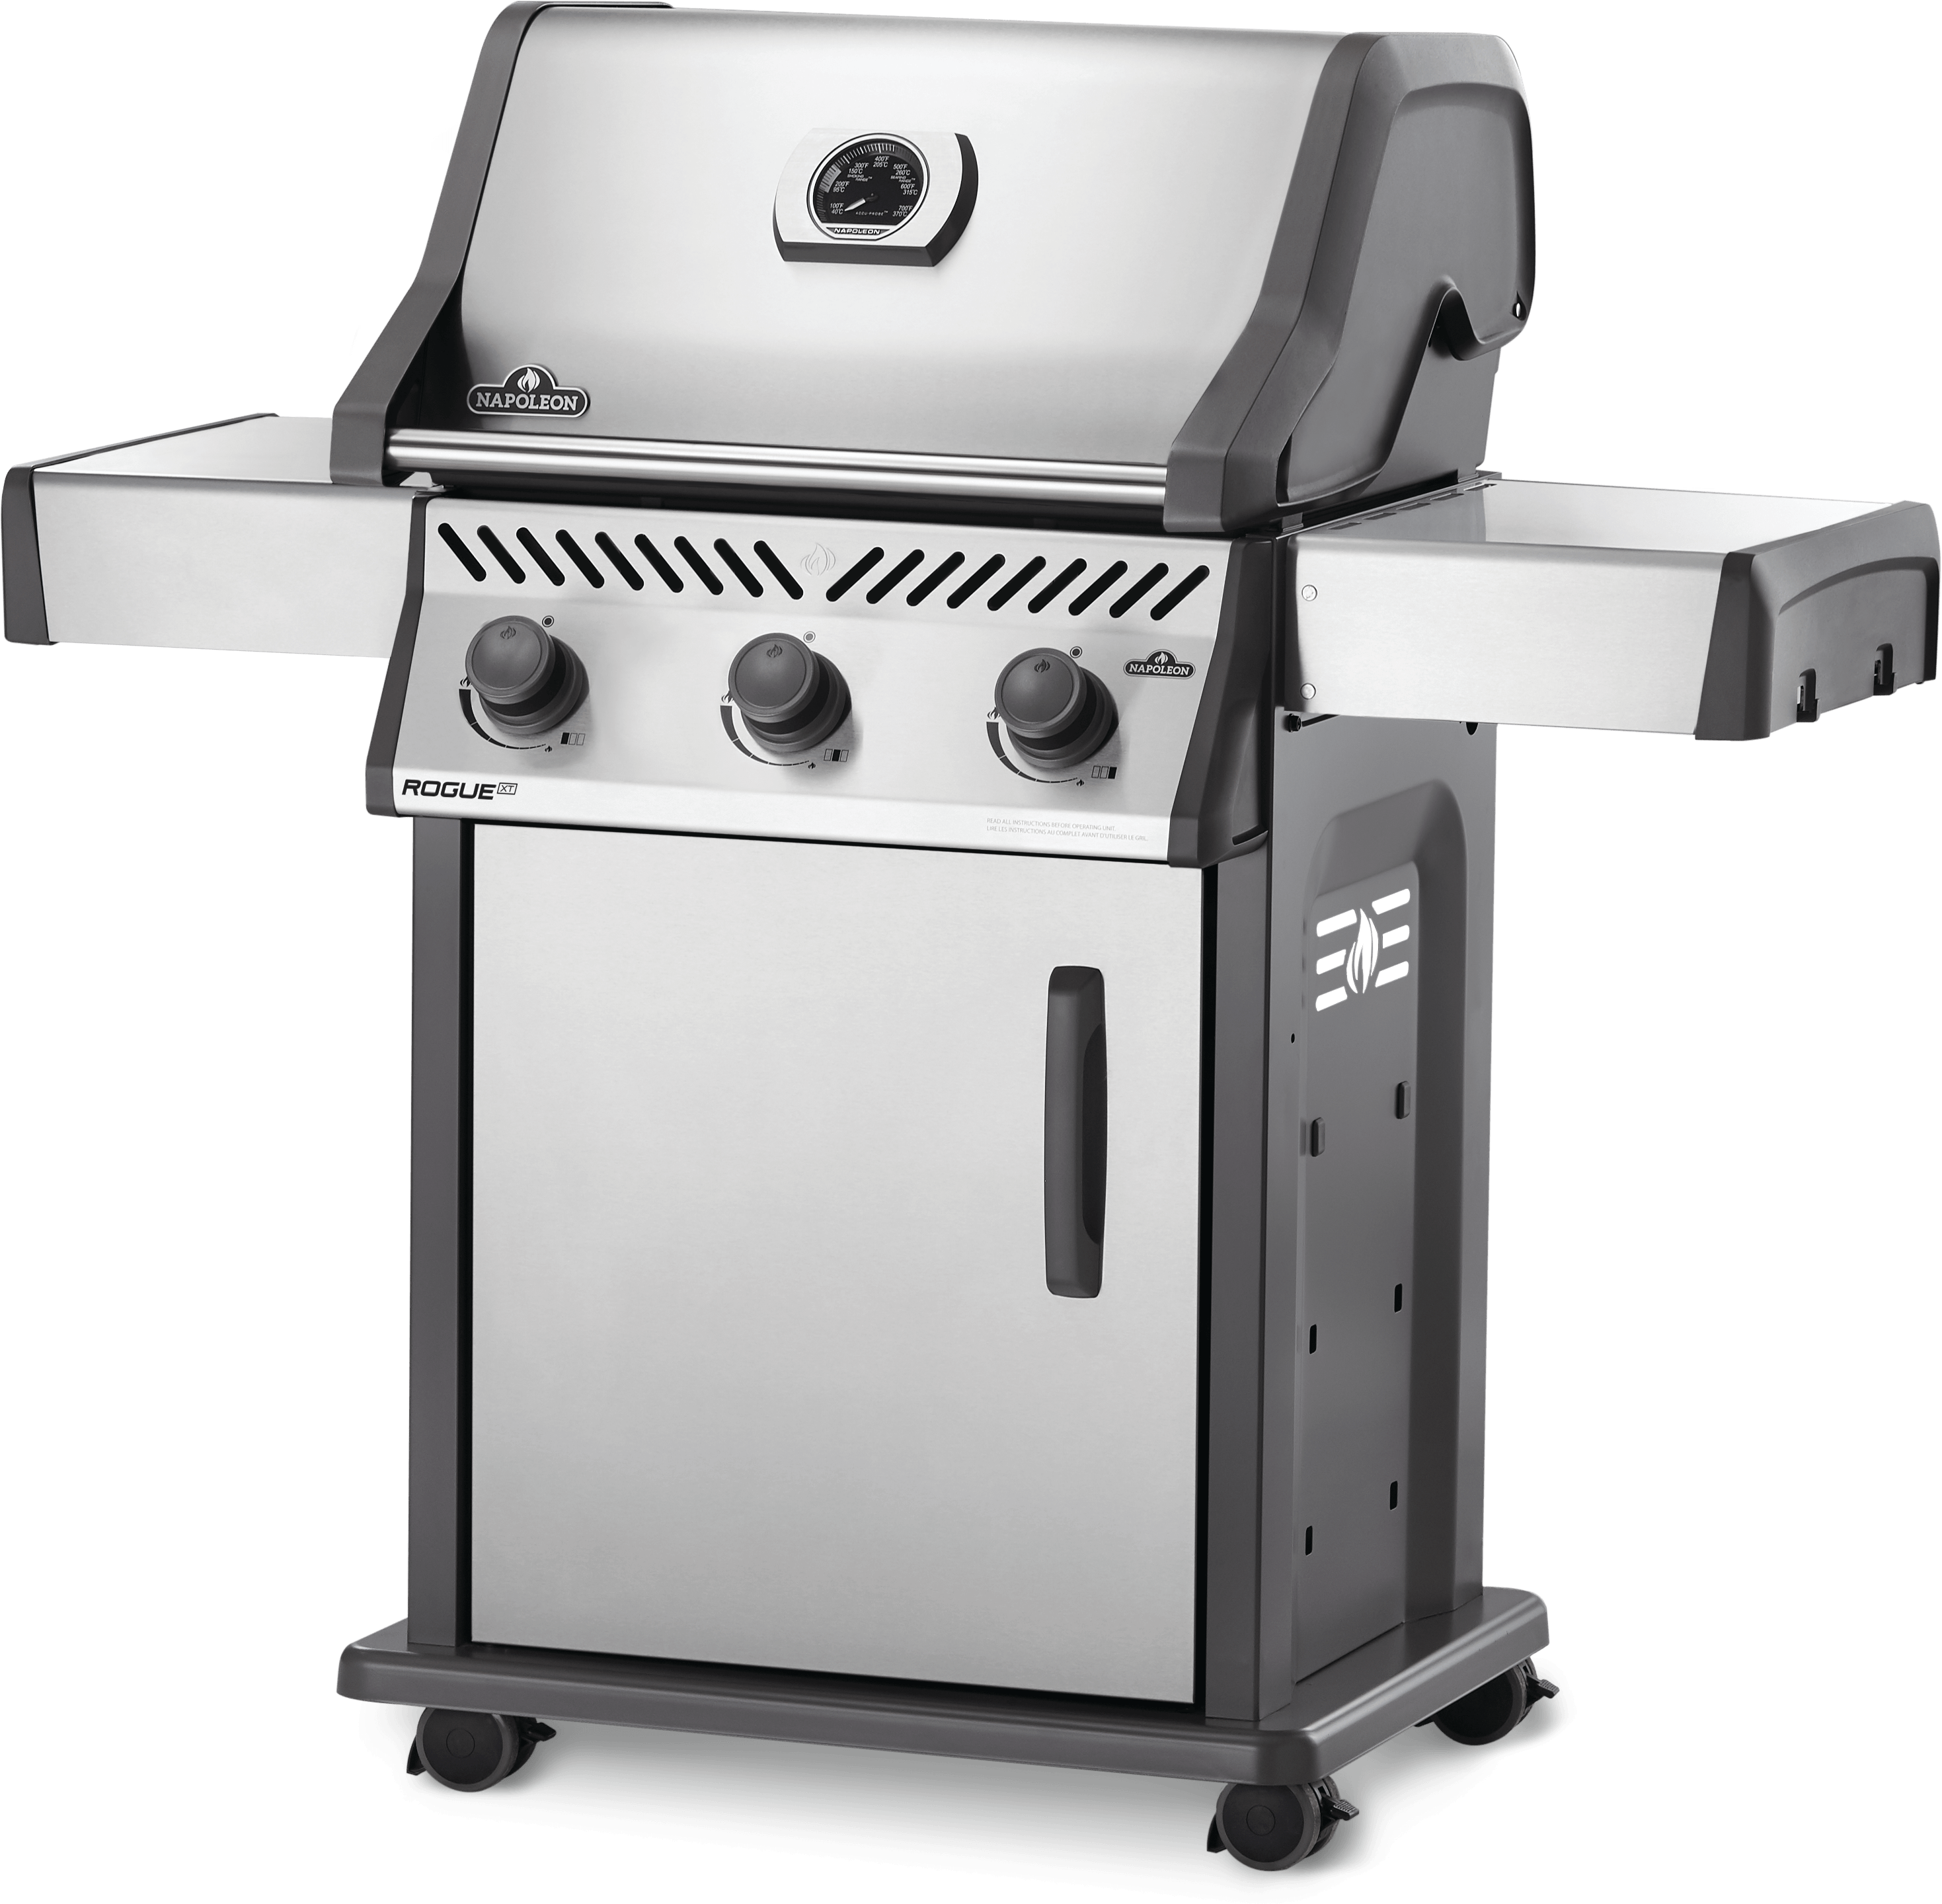 Napoleon Rogue XT 425 Propane Gas Grill, Stainless Steel - image 2 of 13